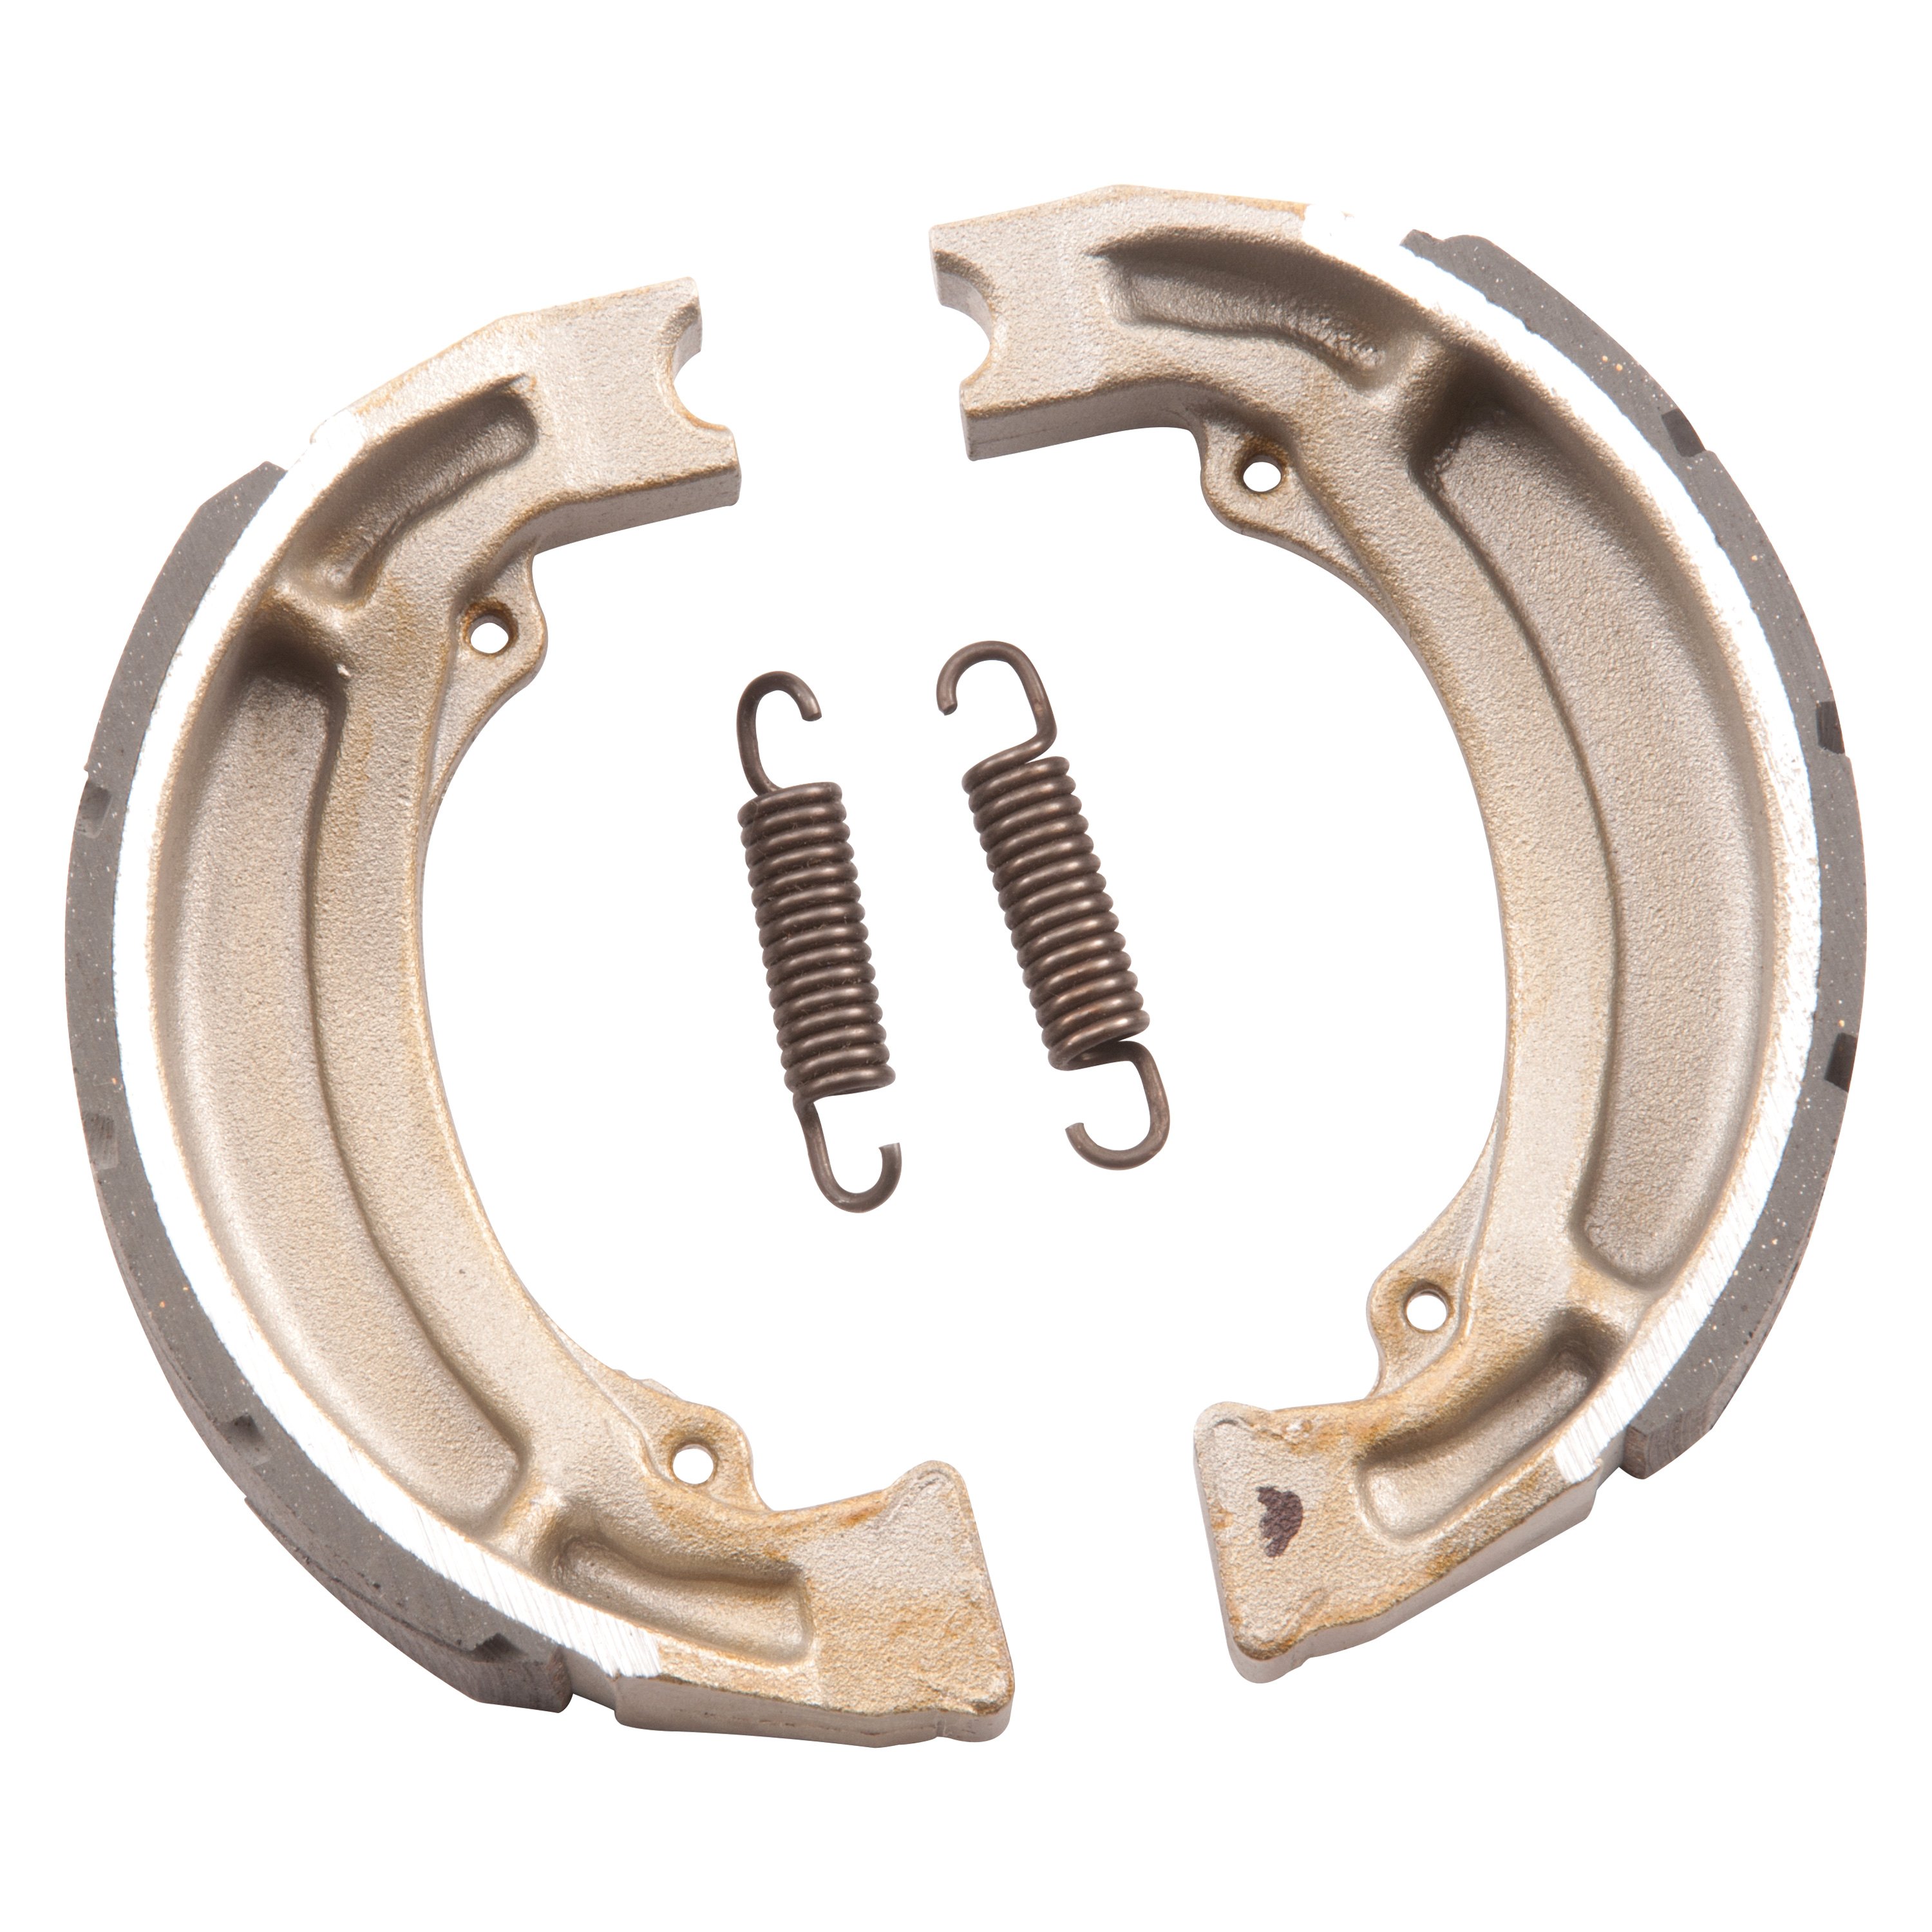 EBC Grooved Rear Brake Shoes for Suzuki LT-A50 2002-2011